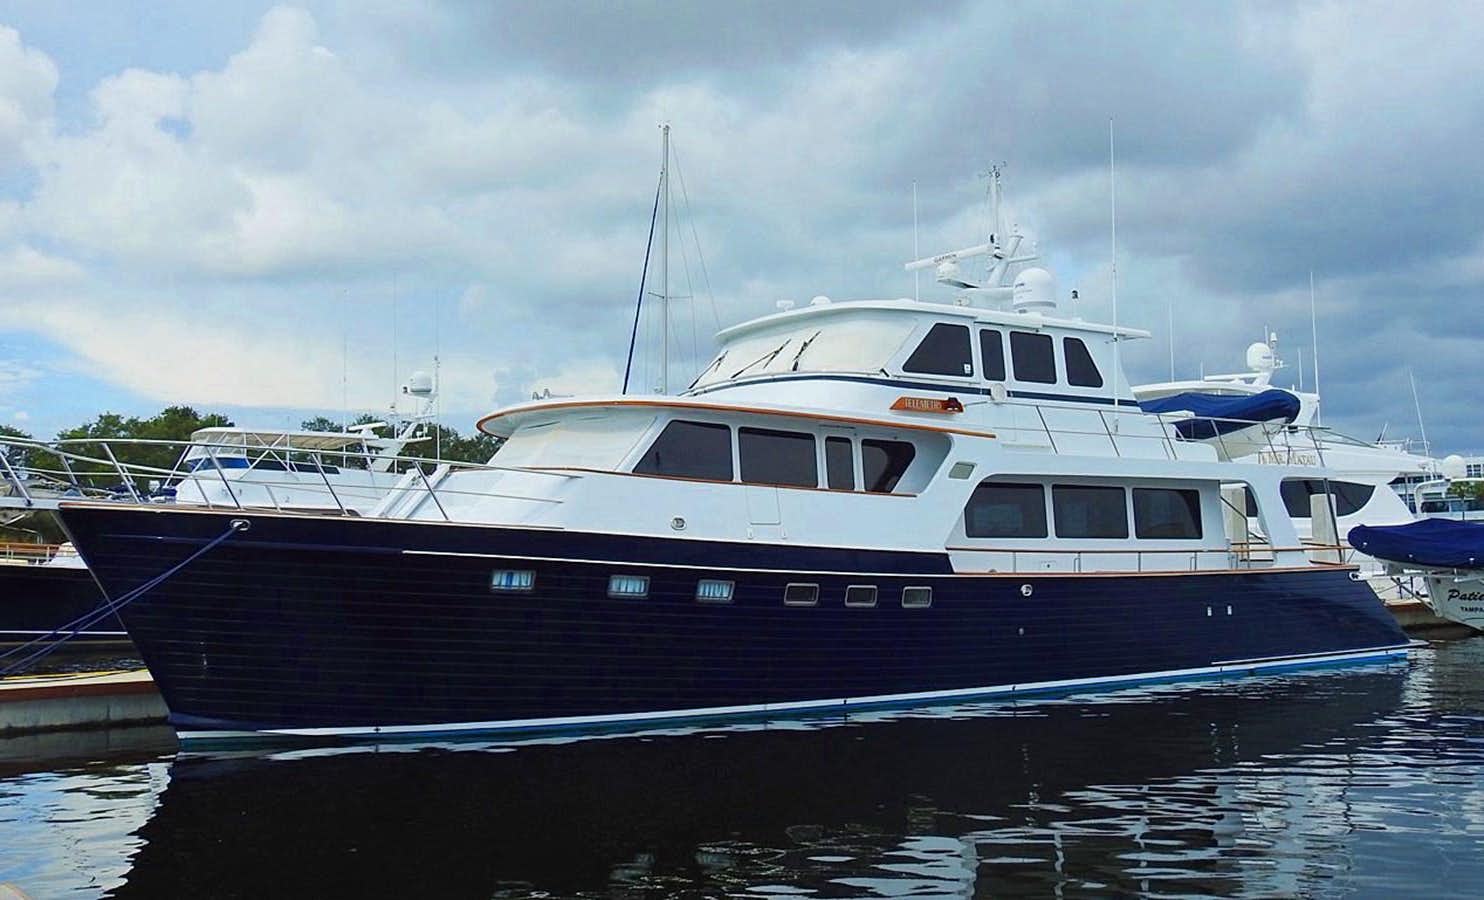 TELEMETRY Yacht for Sale in United States, 72' (21.94m) 2008 MARLOW